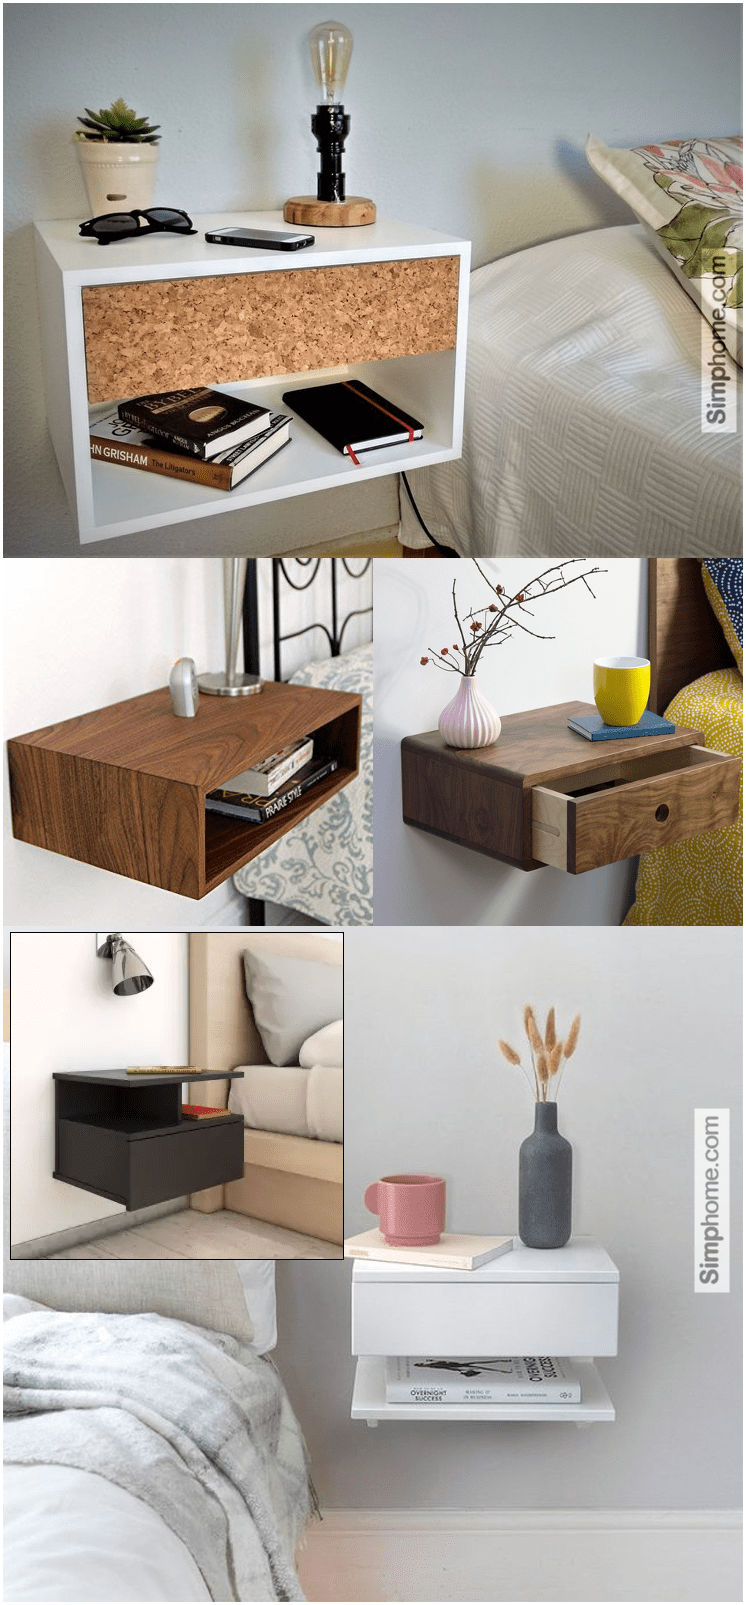 2.Floating Nightstand Ideas by Simphome.com